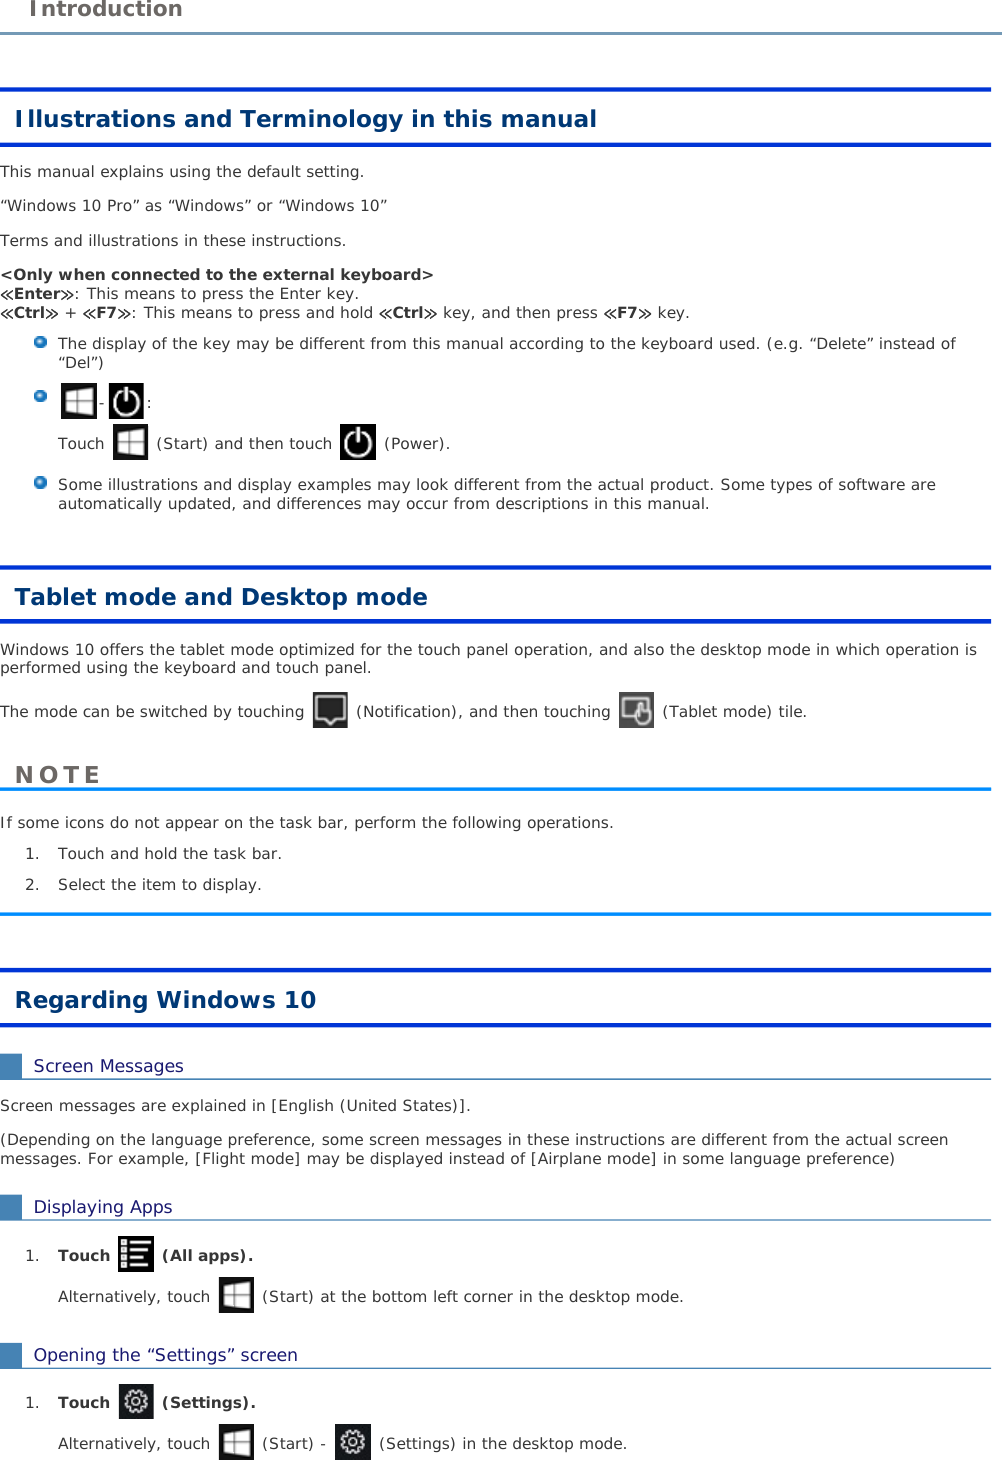 Illustrations and Terminology in this manualThis manual explains using the default setting.“Windows 10 Pro” as “Windows” or “Windows 10”Terms and illustrations in these instructions.&lt;Only when connected to the external keyboard&gt;≪Enter≫: This means to press the Enter key.≪Ctrl≫ + ≪F7≫: This means to press and hold ≪Ctrl≫ key, and then press ≪F7≫ key. The display of the key may be different from this manual according to the keyboard used. (e.g. “Delete” instead of“Del”) -:Touch  (Start) and then touch  (Power).Some illustrations and display examples may look different from the actual product. Some types of software are automatically updated, and differences may occur from descriptions in this manual. Tablet mode and Desktop modeWindows 10 offers the tablet mode optimized for the touch panel operation, and also the desktop mode in which operation is performed using the keyboard and touch panel.The mode can be switched by touching  (Notification), and then touching  (Tablet mode) tile.If some icons do not appear on the task bar, perform the following operations.1. Touch and hold the task bar. 2. Select the item to display.Regarding Windows 10Screen MessagesScreen messages are explained in [English (United States)].(Depending on the language preference, some screen messages in these instructions are different from the actual screen messages. For example, [Flight mode] may be displayed instead of [Airplane mode] in some language preference)Displaying Apps1. Touch (All apps).Alternatively, touch  (Start) at the bottom left corner in the desktop mode.Opening the “Settings” screen1. Touch (Settings).Alternatively, touch  (Start) - (Settings) in the desktop mode.IntroductionNOTE